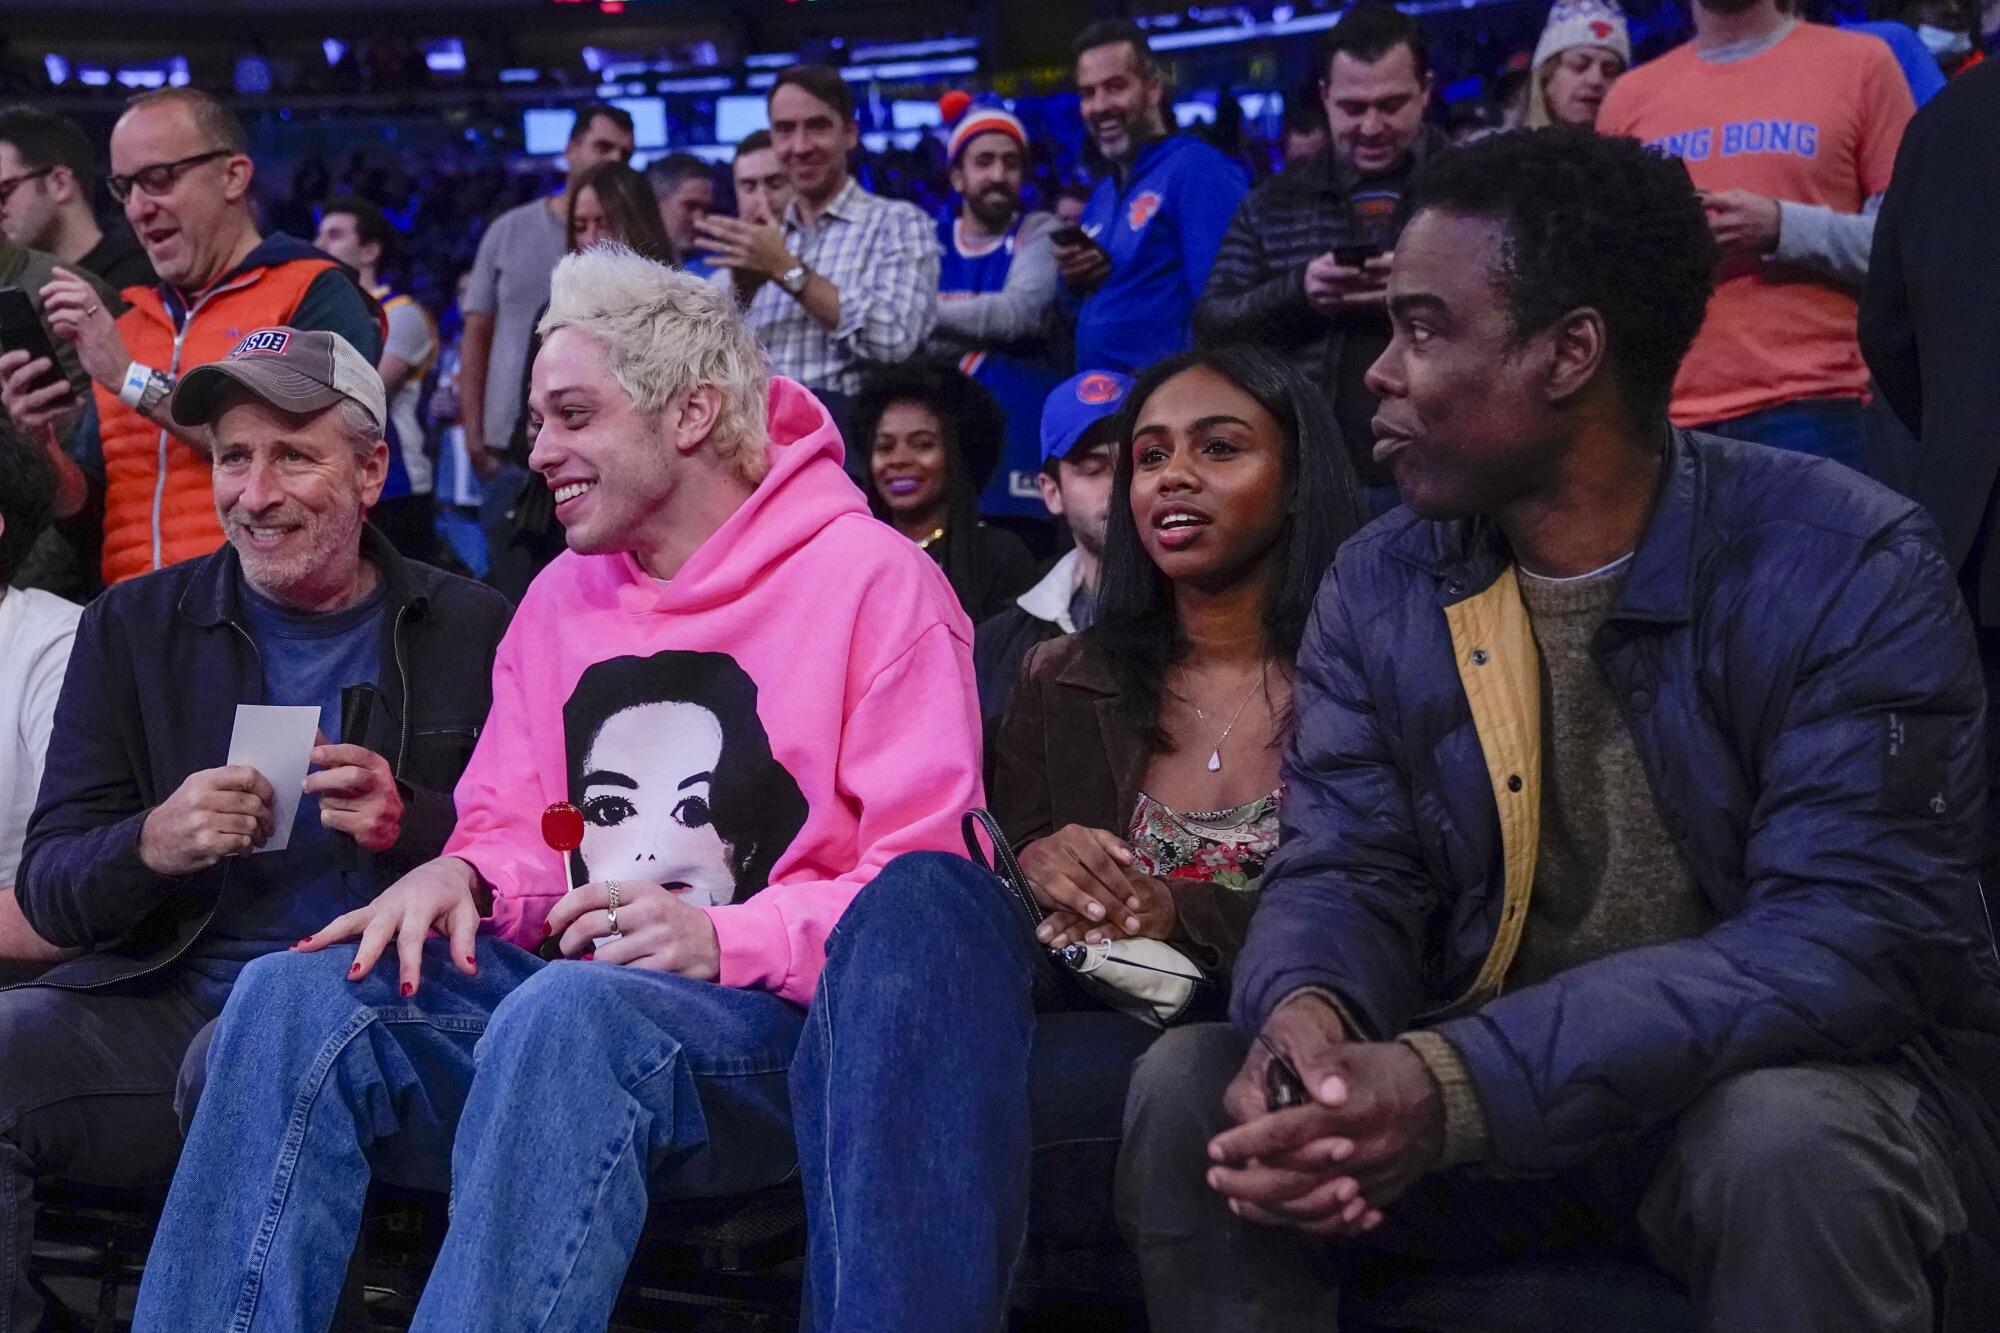 Comedians Jon Stewart, left, Pete Davidson, second from left, and Chris Rock, right.